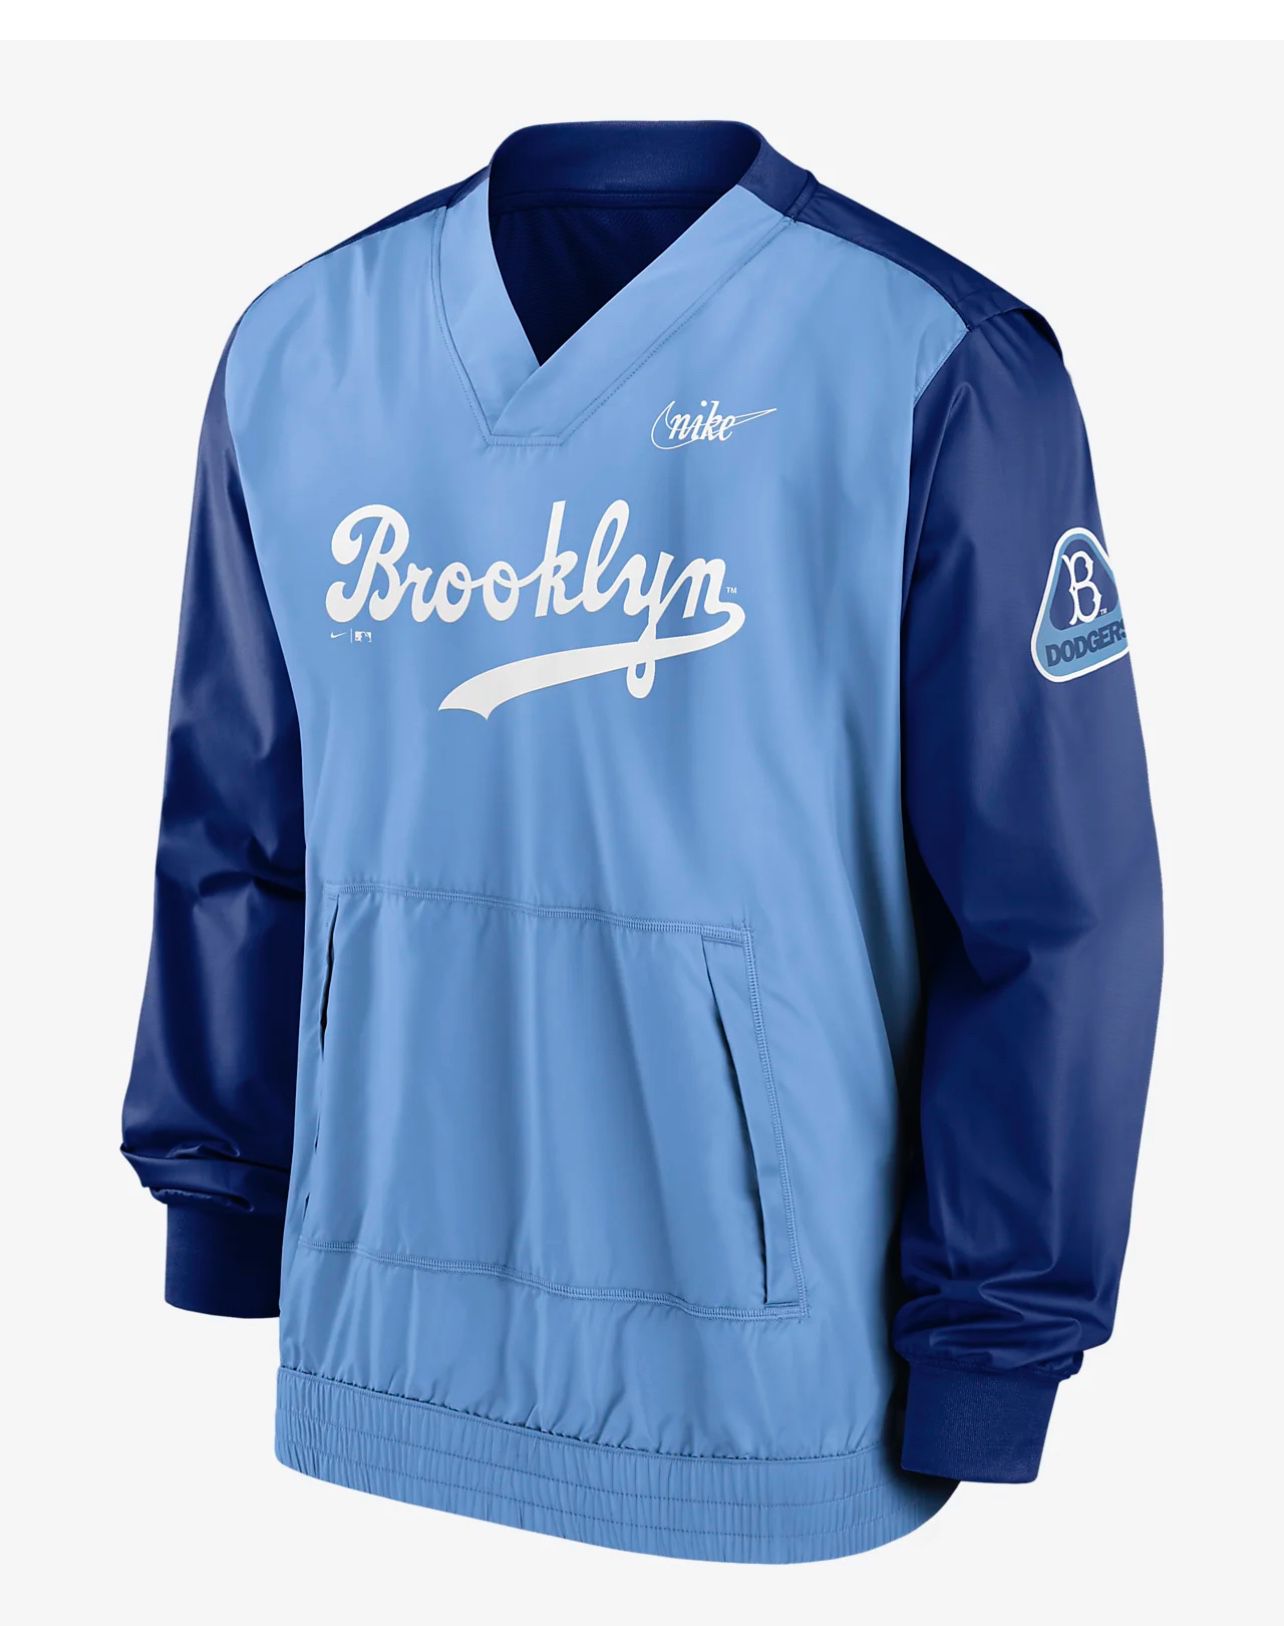 Nike Cooperstown (MLB Brooklyn Dodgers) Men's Pullover Jacket Size L-Large